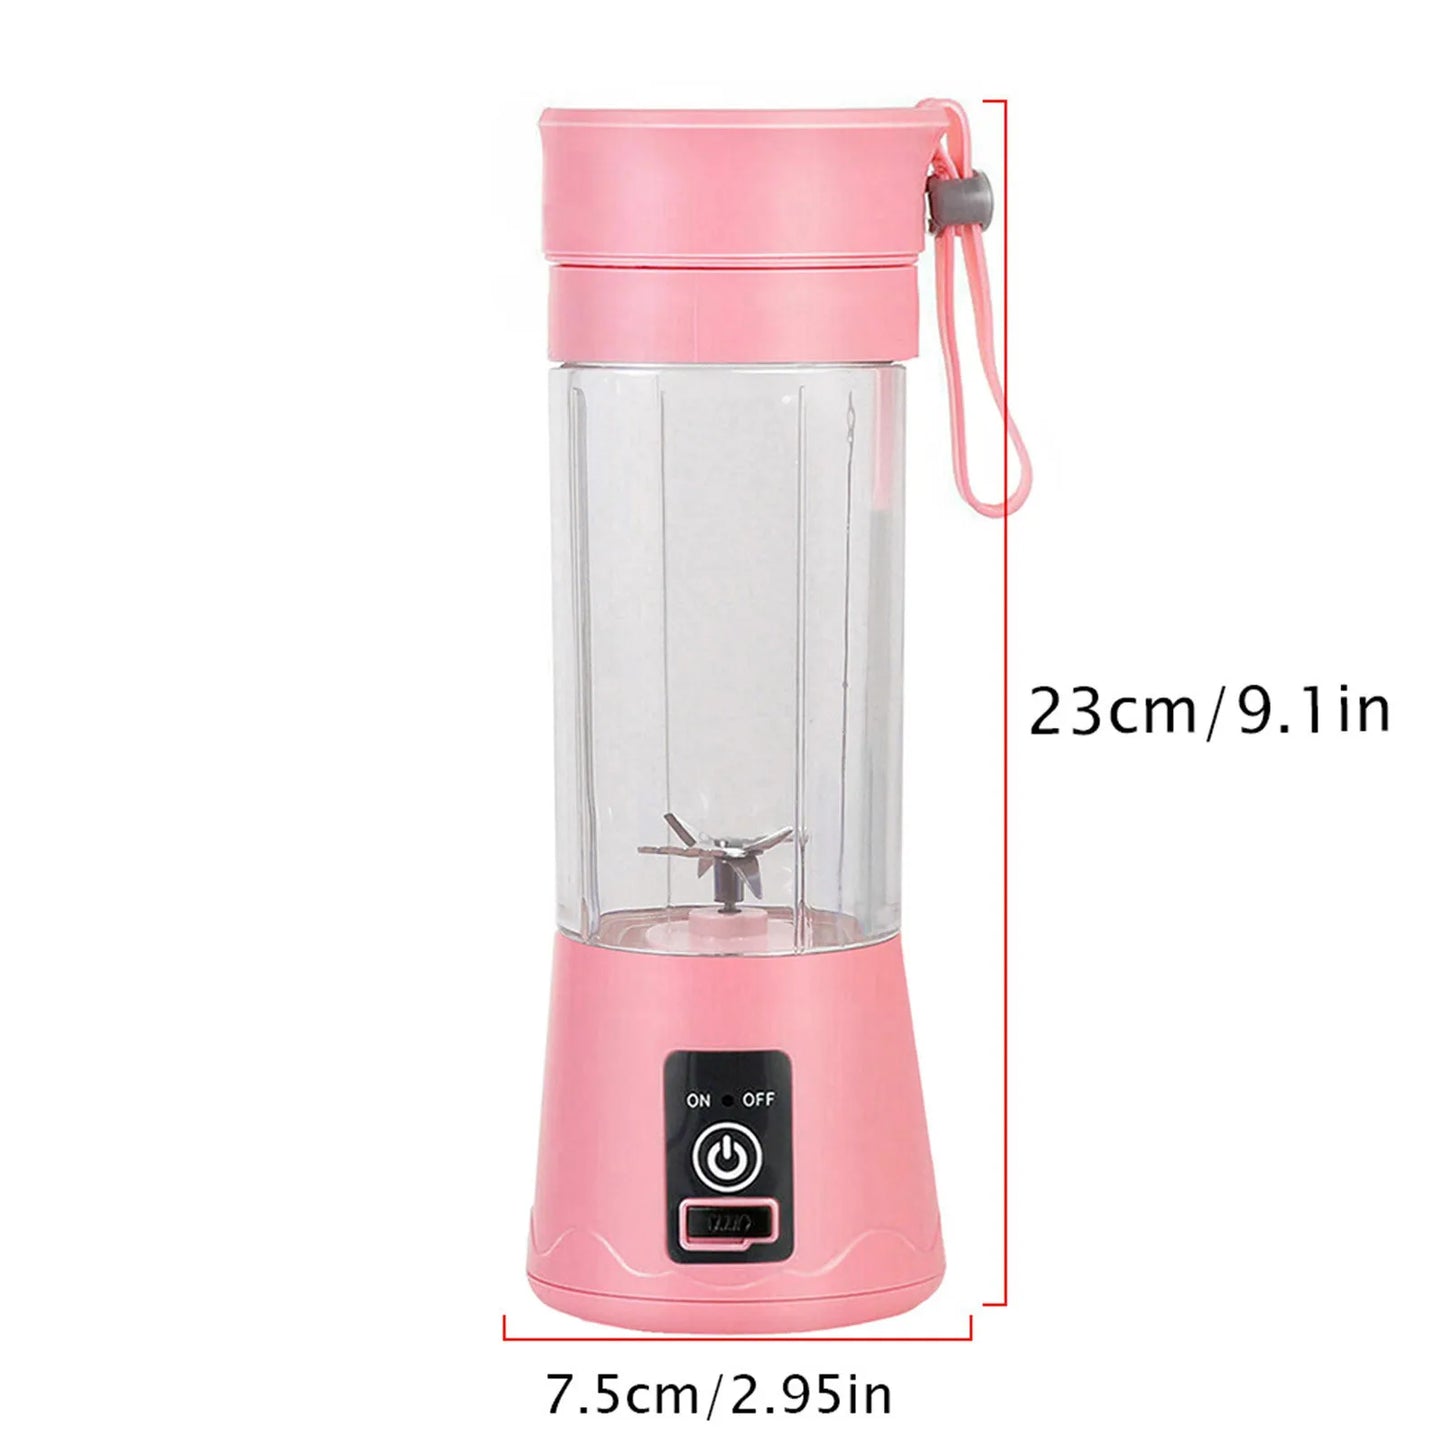 Portable Blender with USB Rechargeable Mini Fruit Juice Mixer Personal Blender for Smoothies and Shakes Fruit Juice Milk Juicer